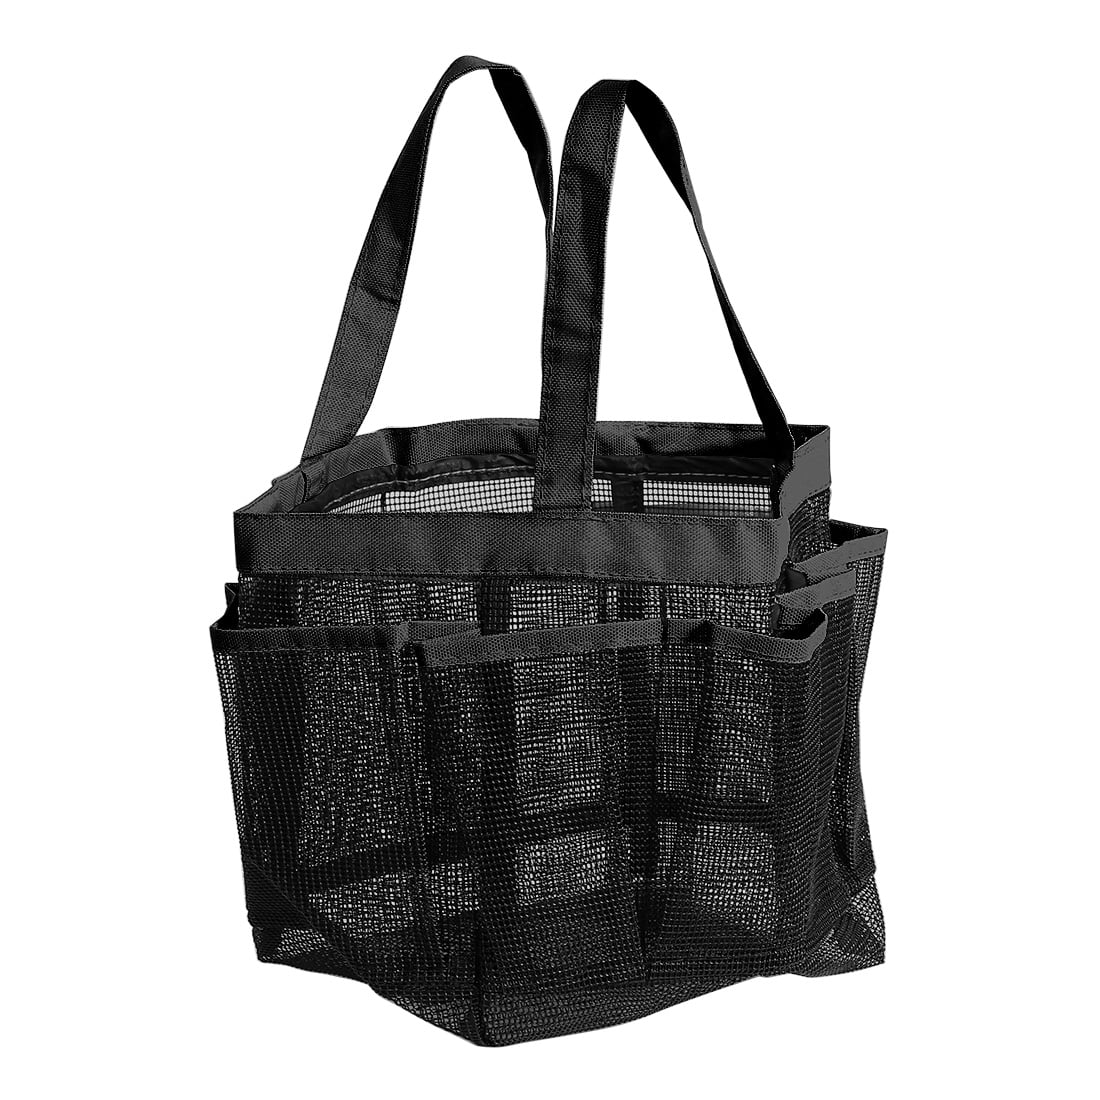 Gym & Camping iPEGTOP Portable Mesh Shower Caddy Black Quick Dry Shower Tote Hanging Bath & Toiletry Organizer Bag with 9 Storage Pockets Travel Double Handles for College Dorm 